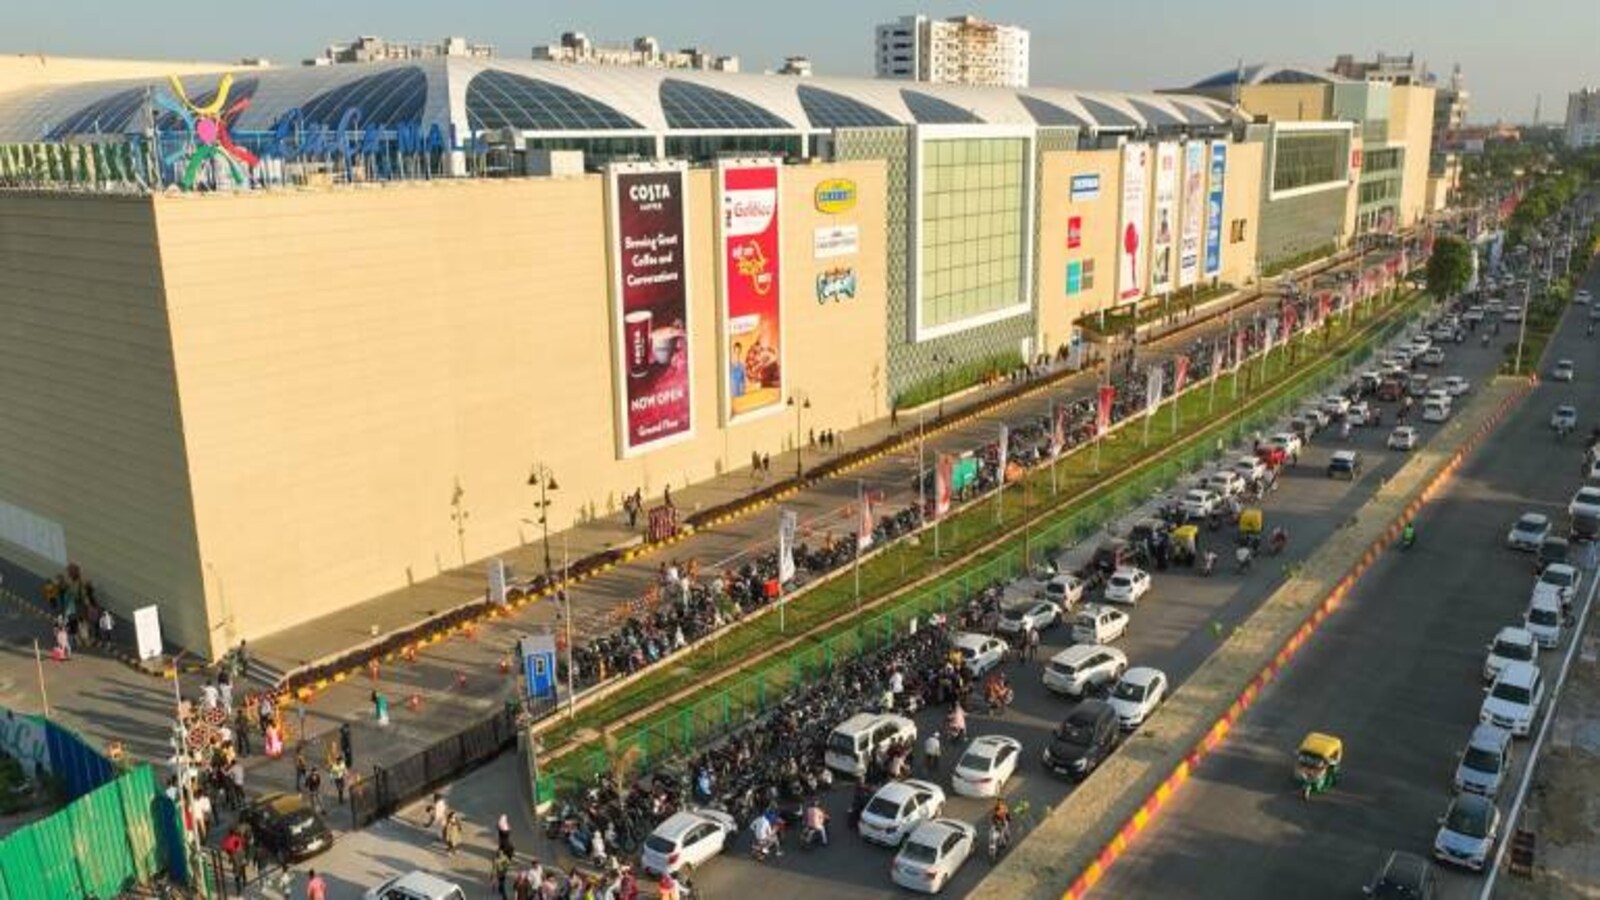 https://images.moneycontrol.com/static-mcnews/2022/08/First-day-of-the-Lulu-Mall-Lucknow-770x399.jpg?impolicy=website&width=1600&height=900